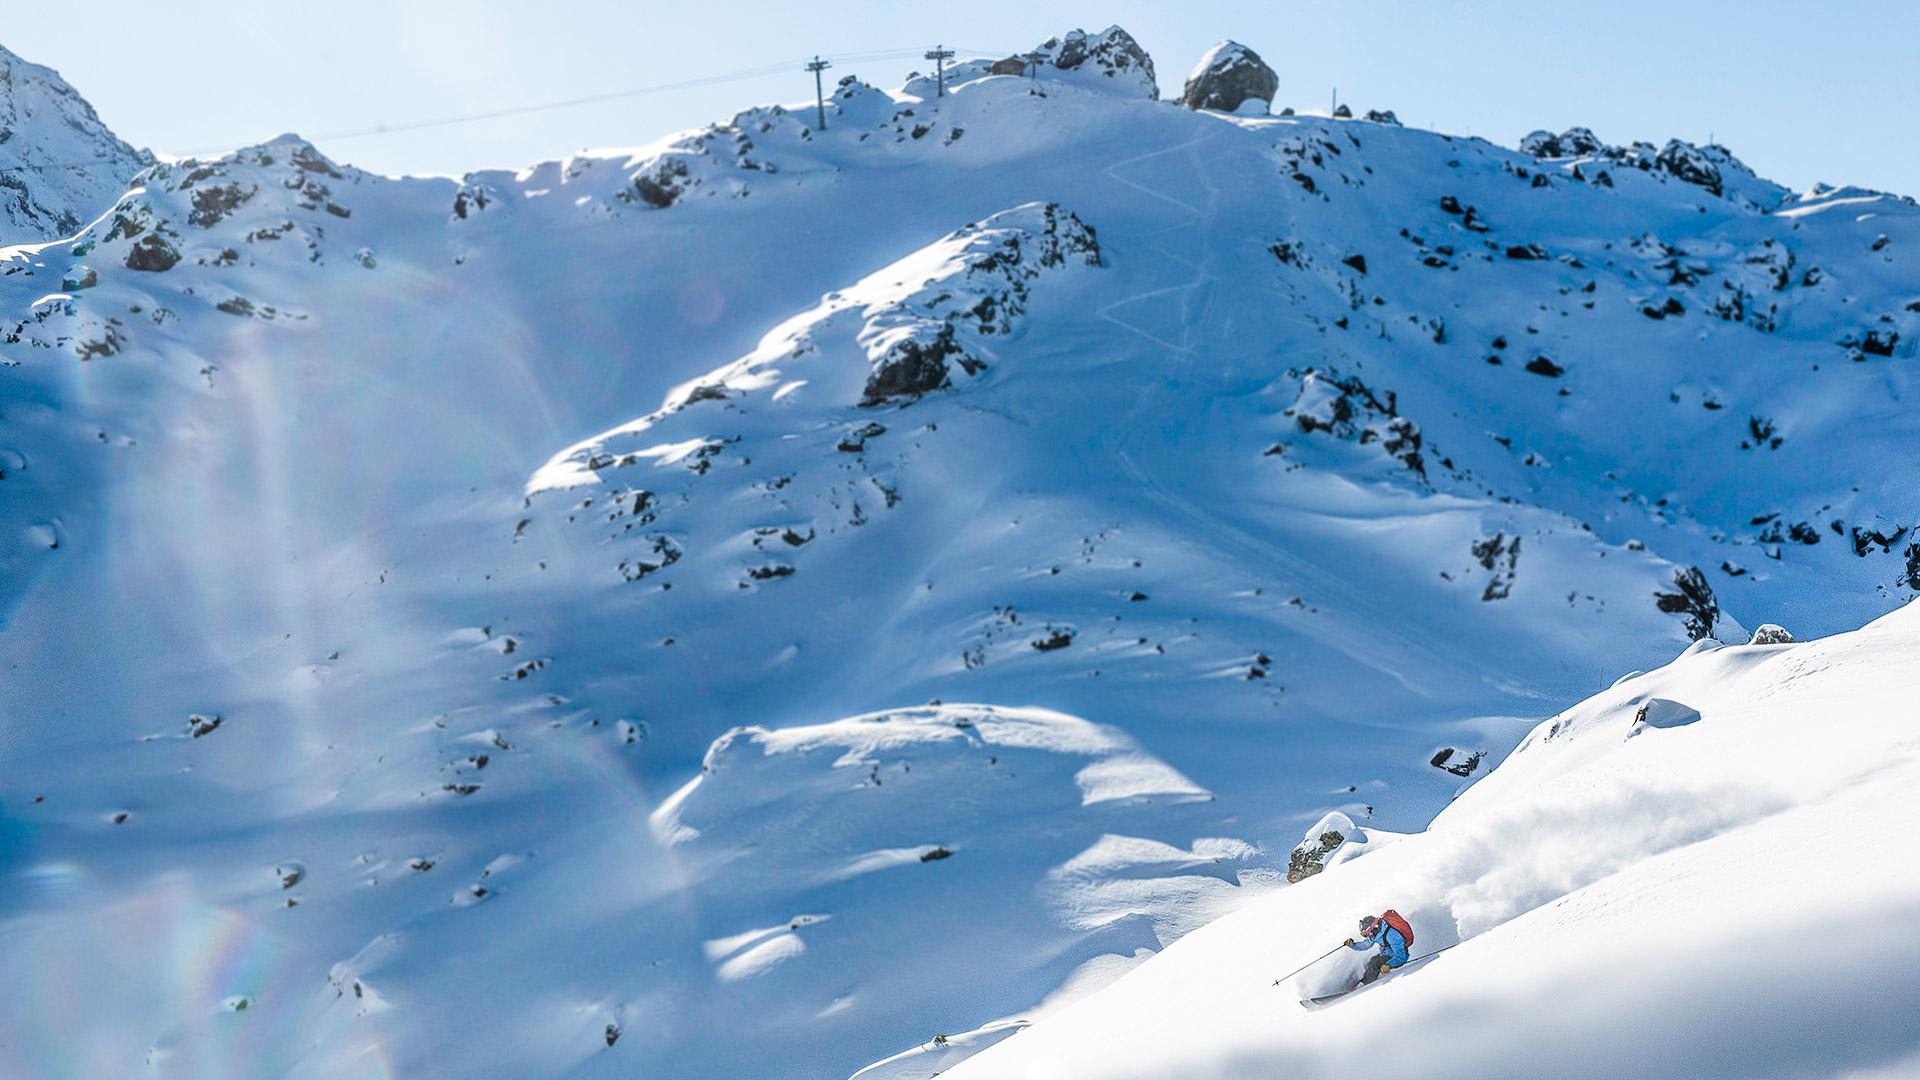 Adult ski lessons and off-piste skiing with the ski school - Les 3 Vallées